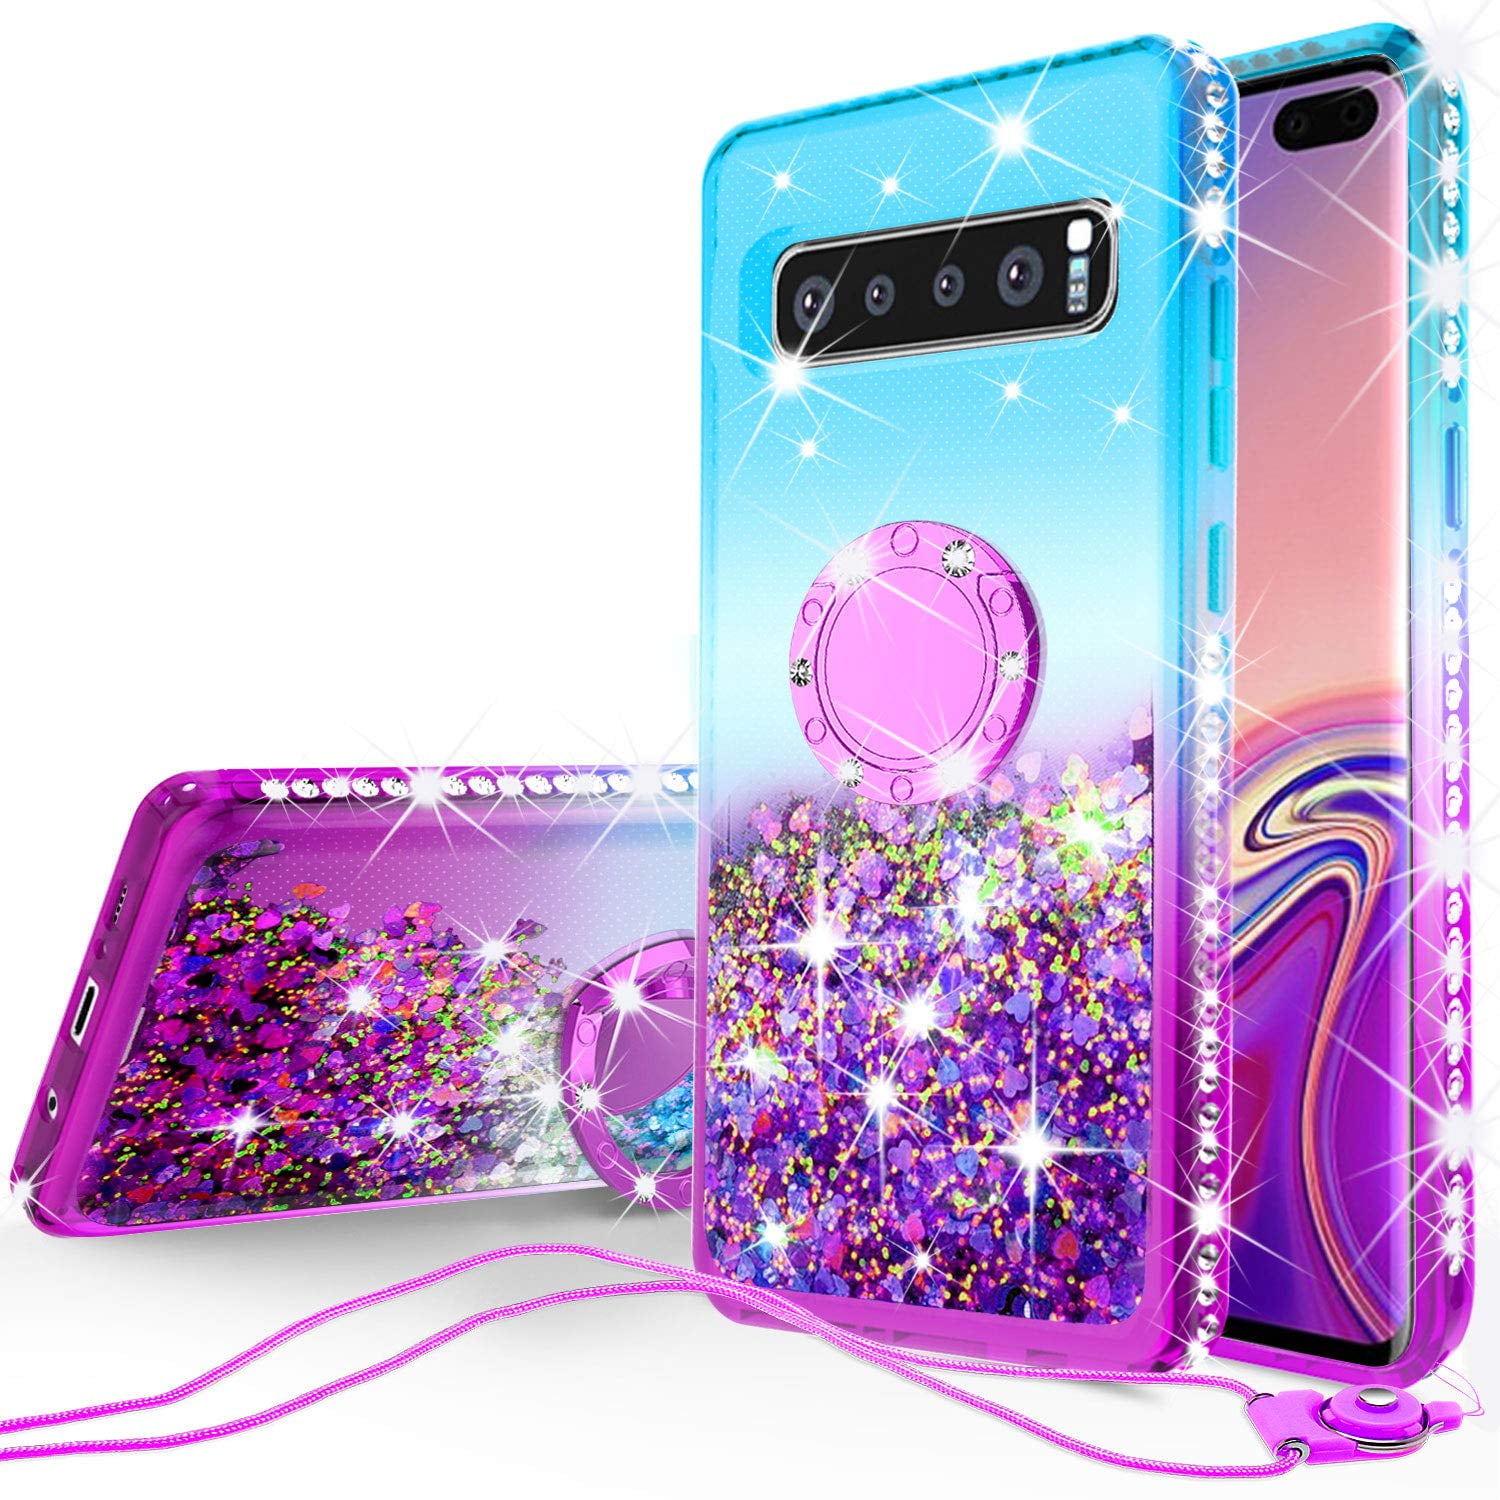 Unichthy Samsung Galaxy S10 Case 3D Pattern Glitter Gems Shockproof Wallet Flip Phone Case Folio Leather Magnetic Protective Cover Bumper TPU with Stand Card Holder for Samsung Galaxy S10 Cherry Tree